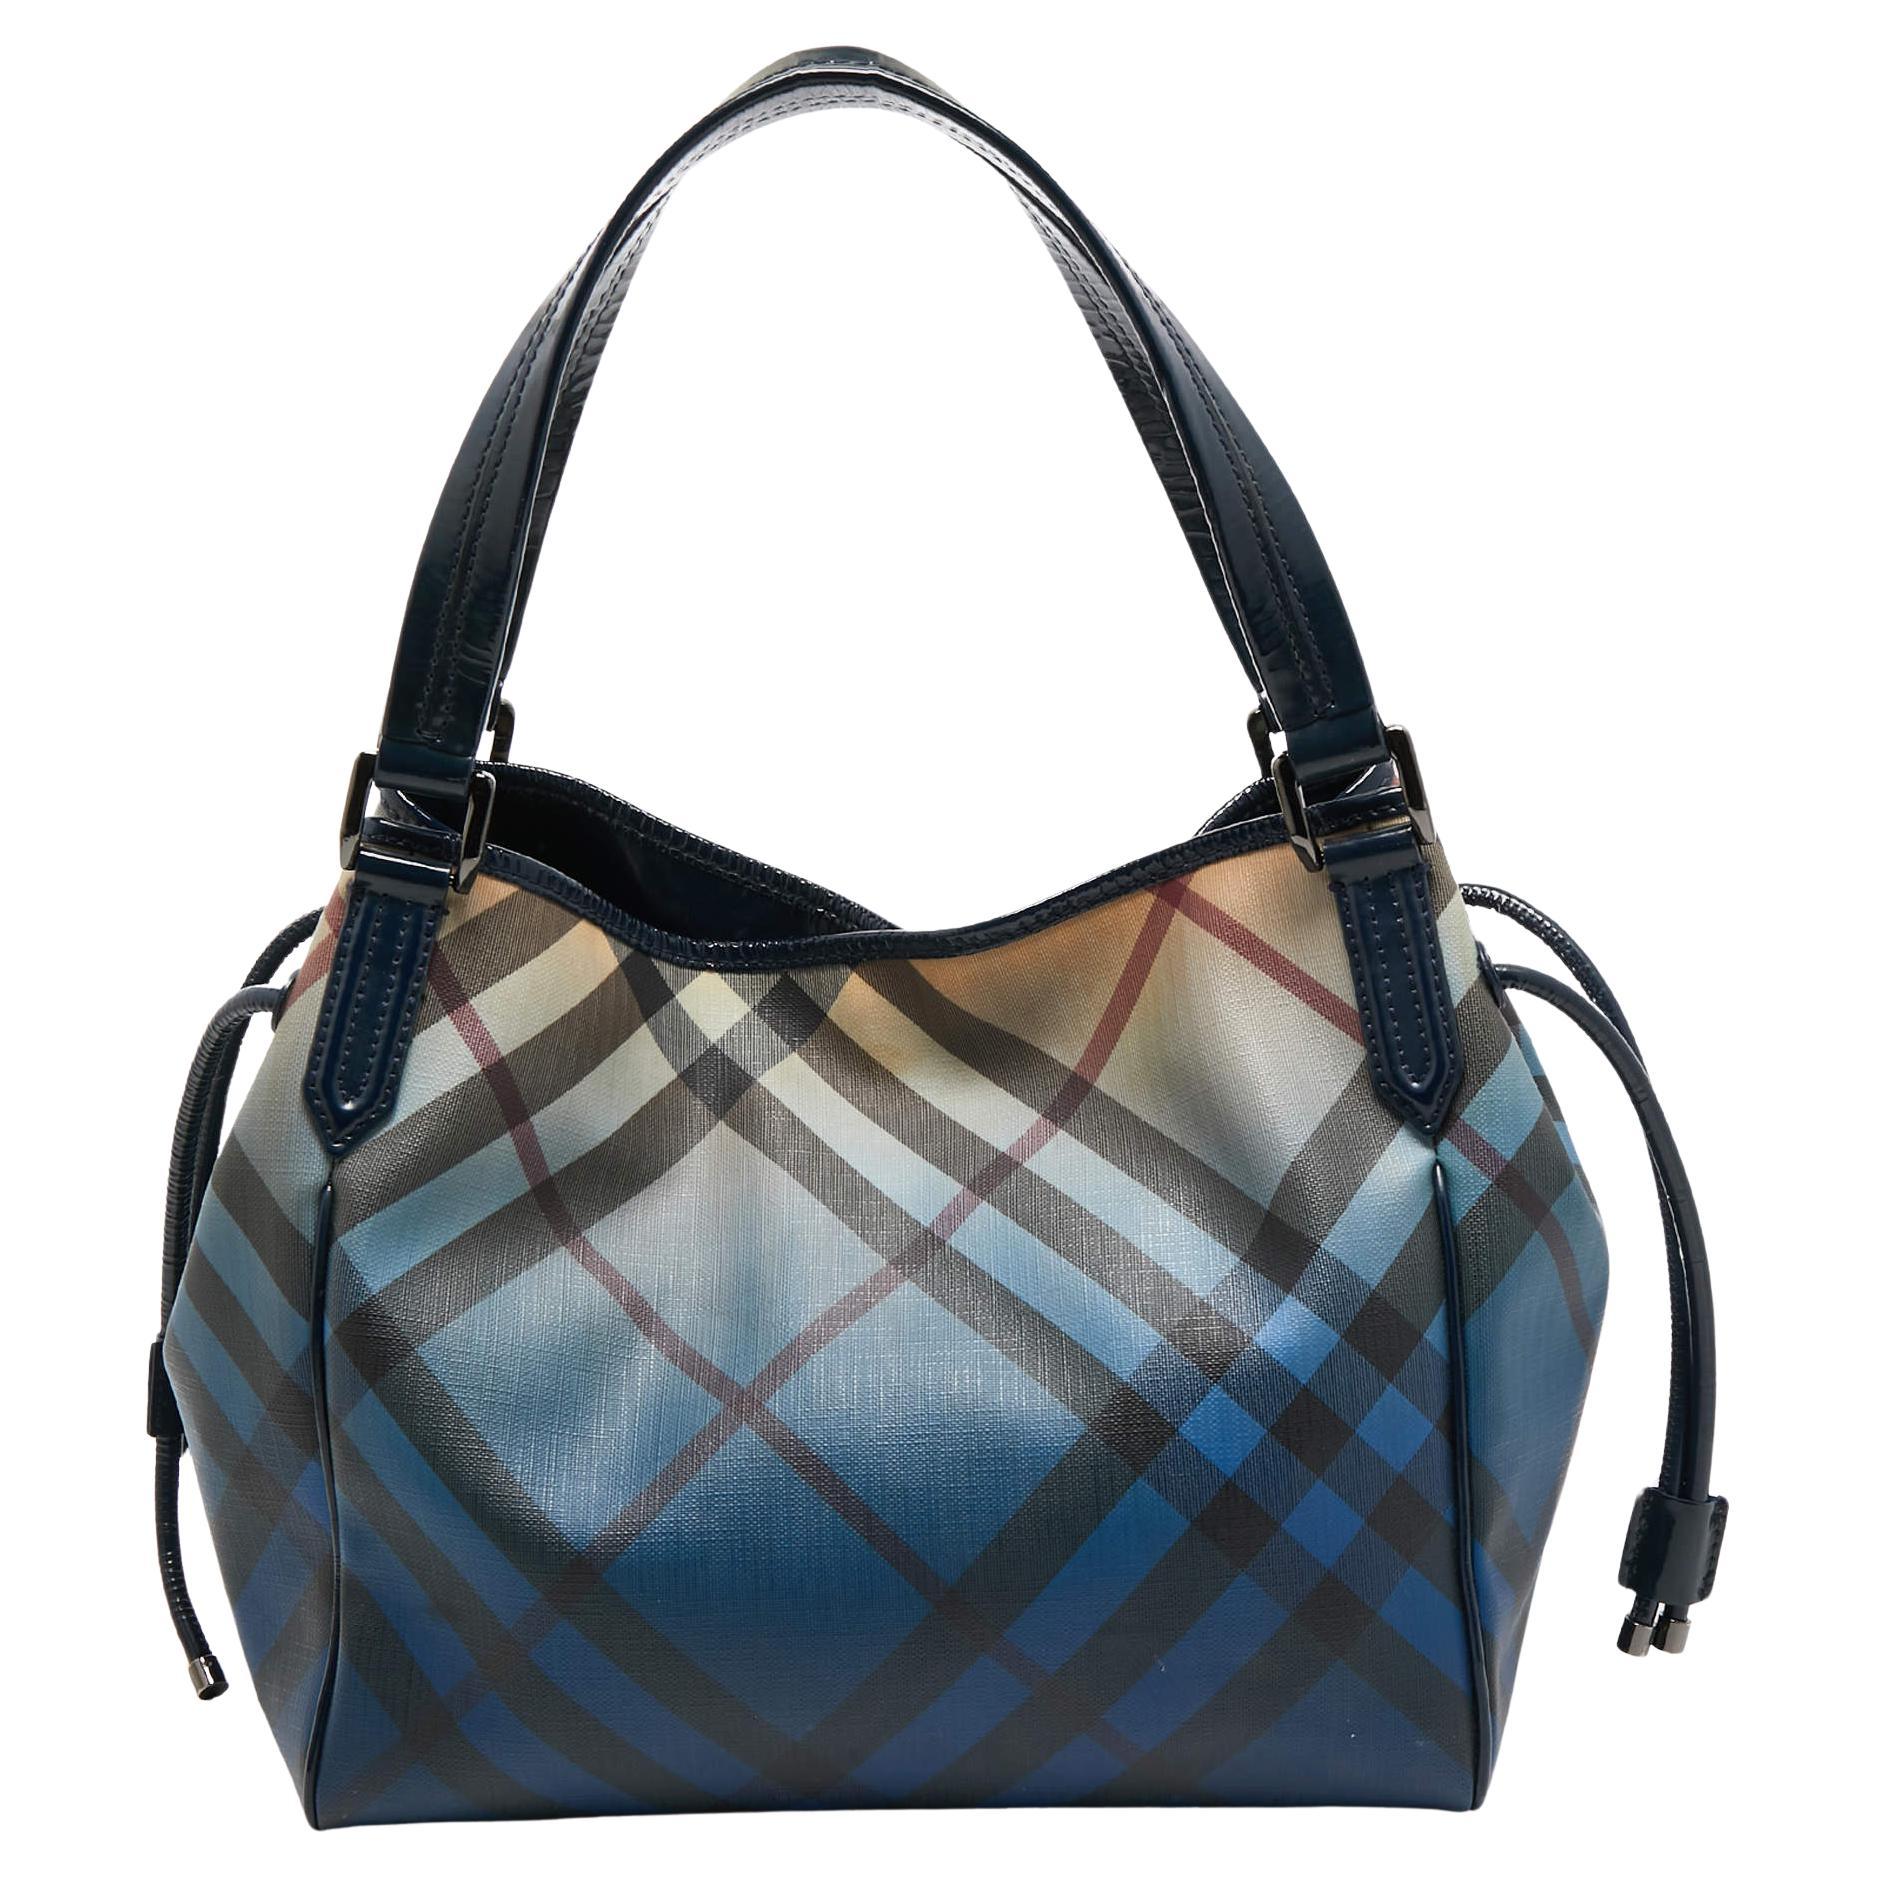 Burberry Navy Blue/Beige Ombre PVC and Patent Leather Biltmore Tote